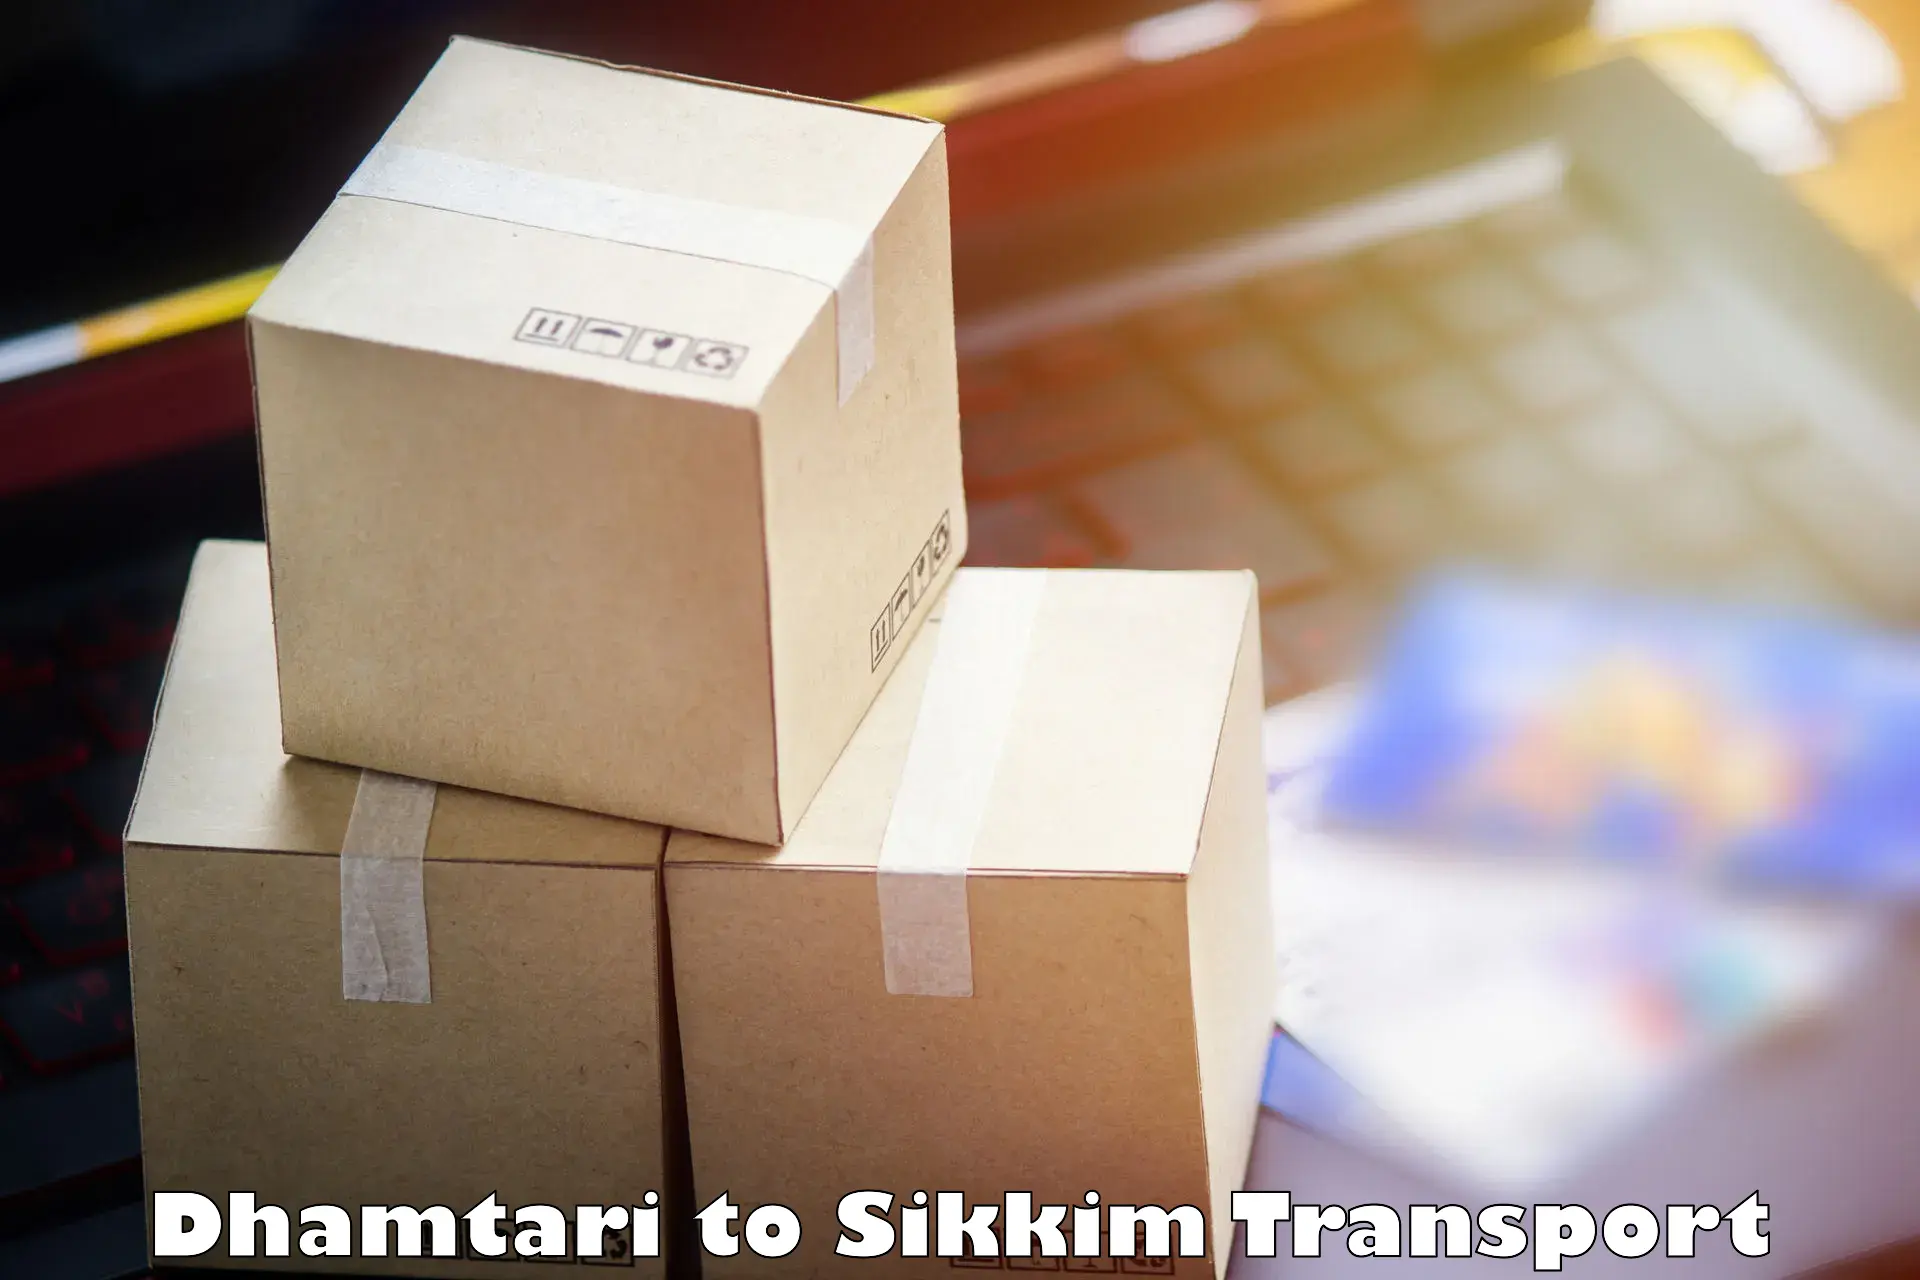 Commercial transport service Dhamtari to East Sikkim